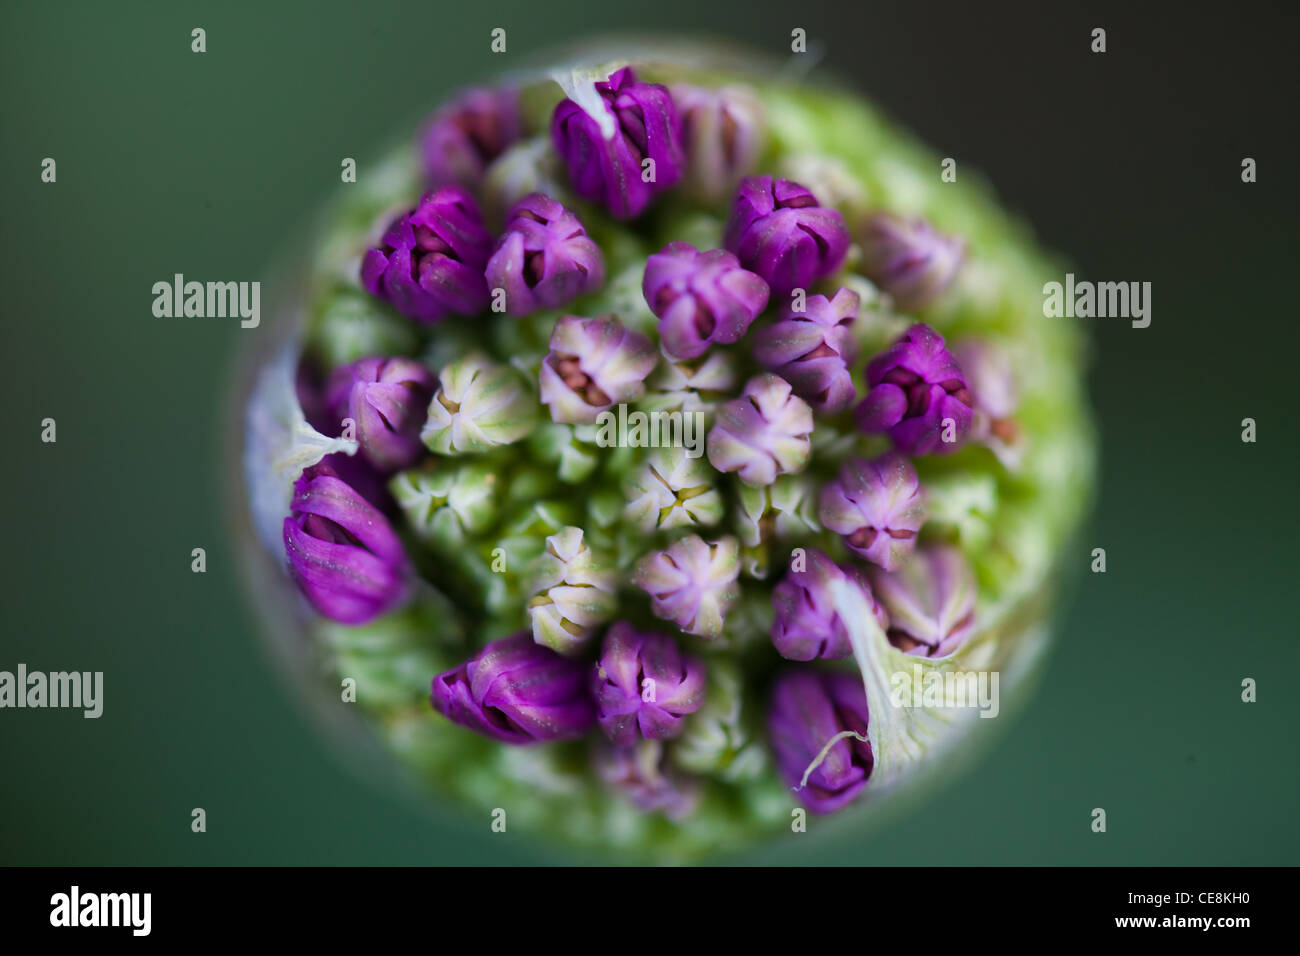 An Alium flower waiting to bloom at the start of spring Stock Photo